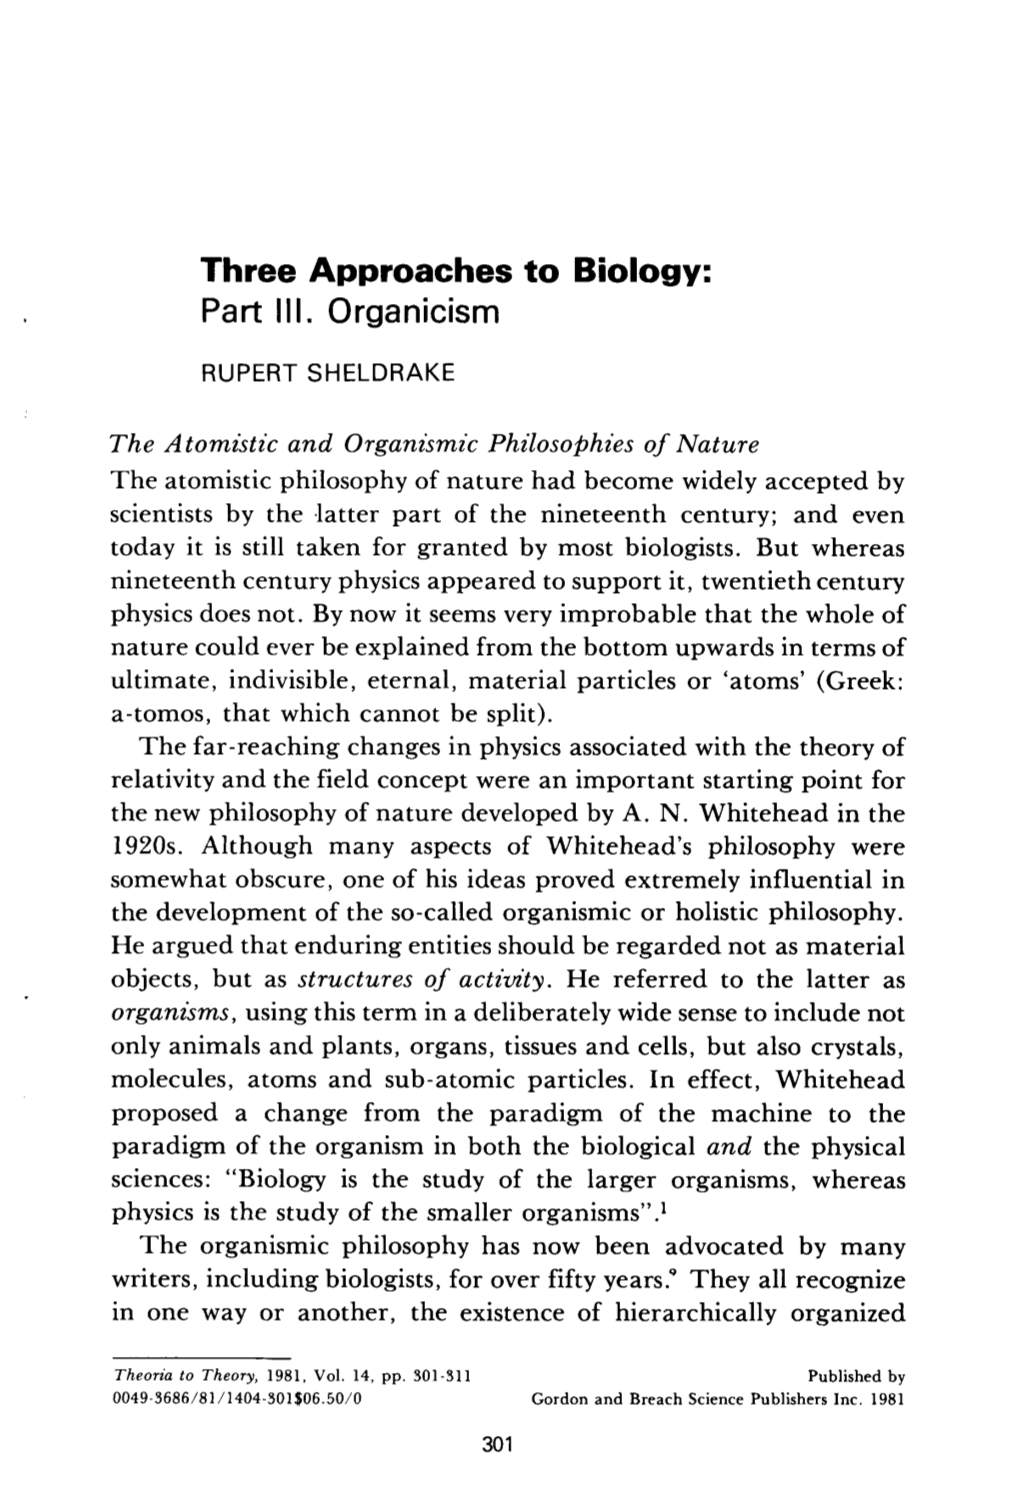 Three Approaches to Biology: Partlll